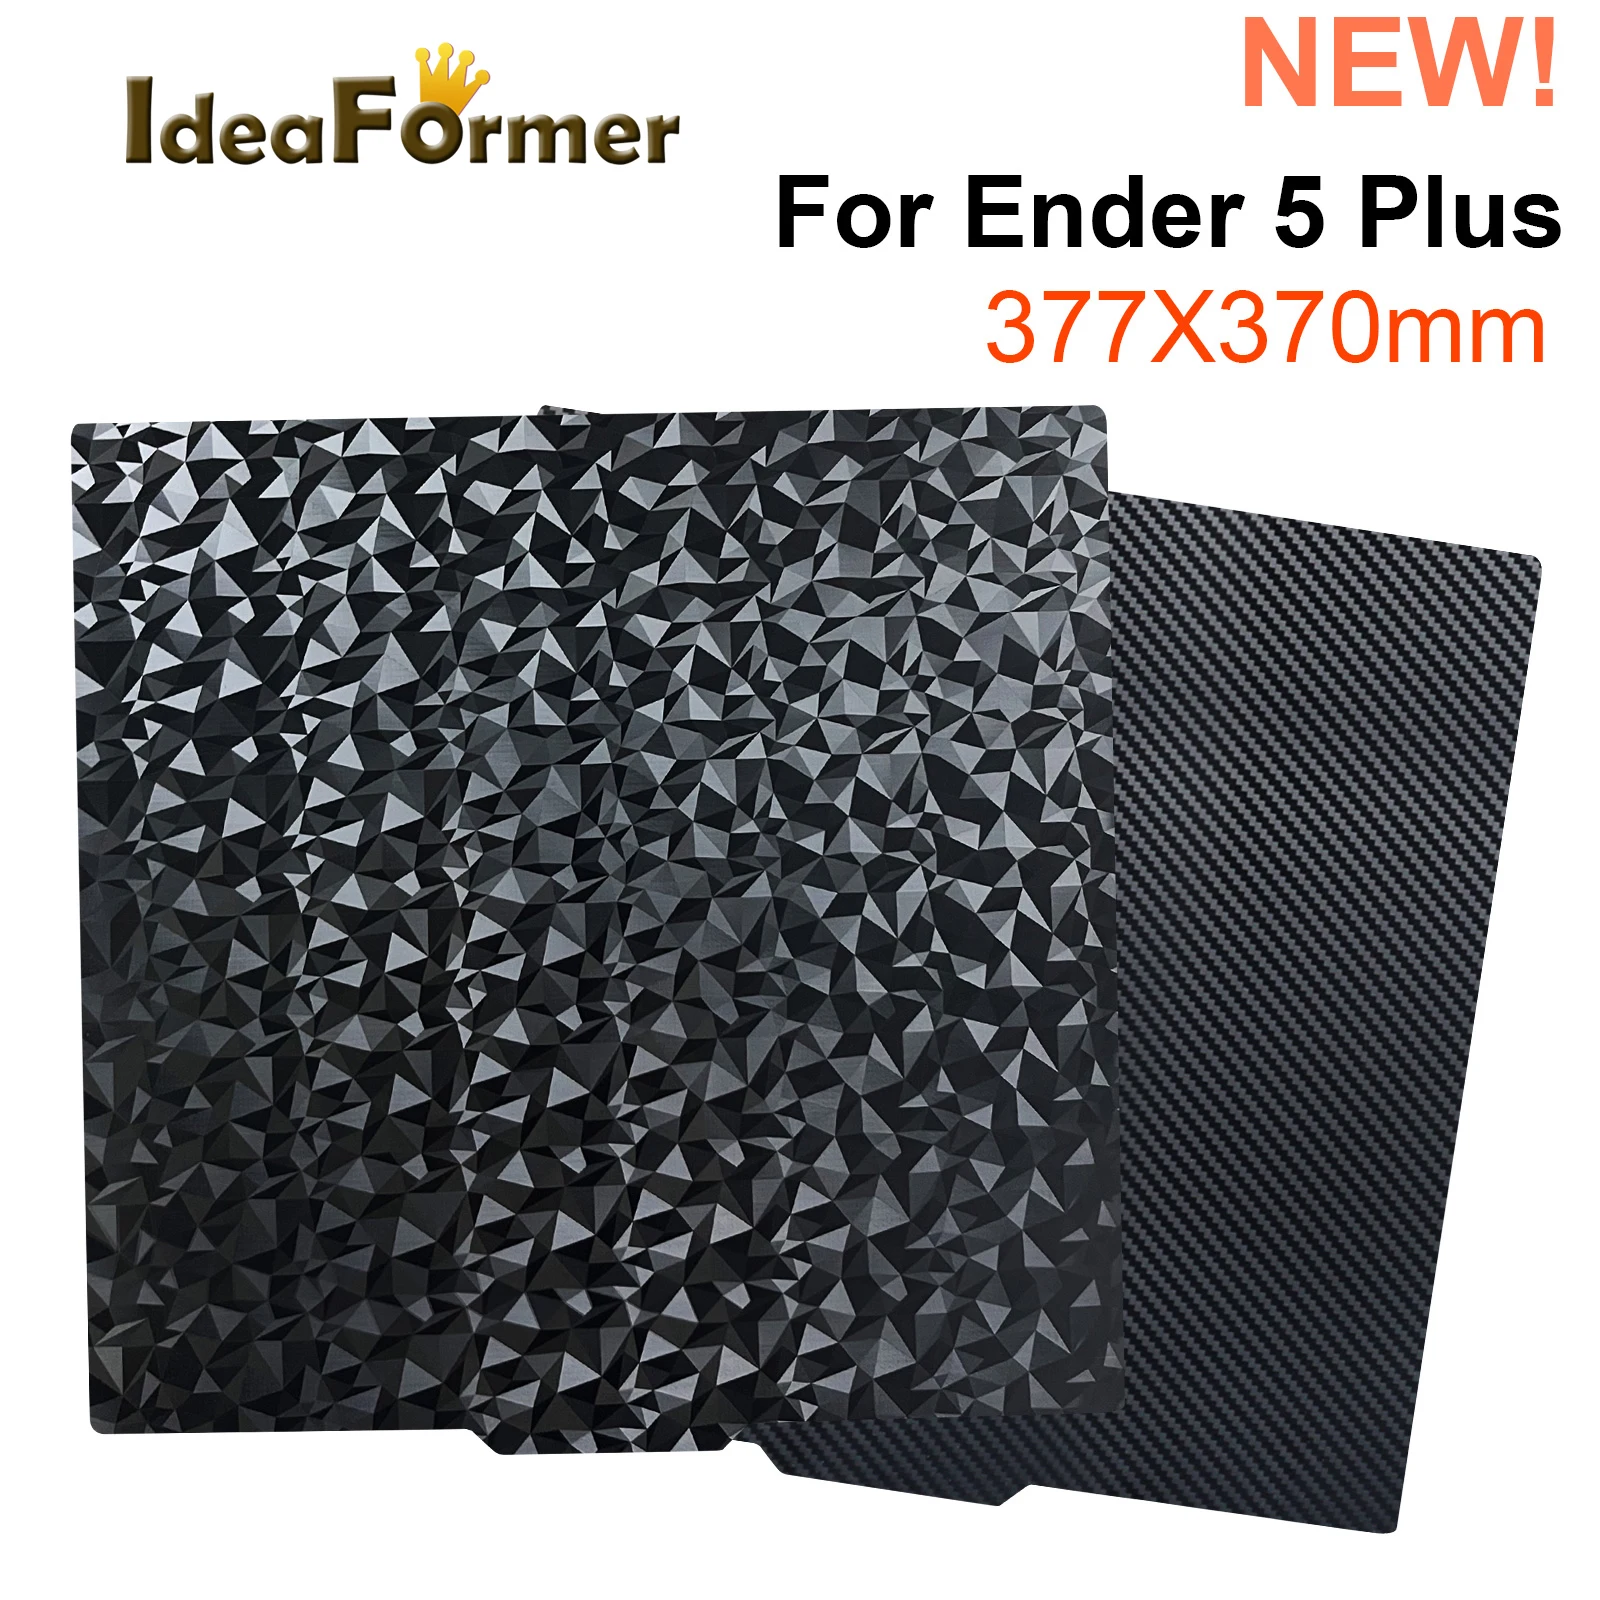 

IdeaFormer For Ender-5 Plus Smooth PEO+Smooth PET Double Sided Build Plate 377x370mm Flexible Removable Spring Steel Heated Bed